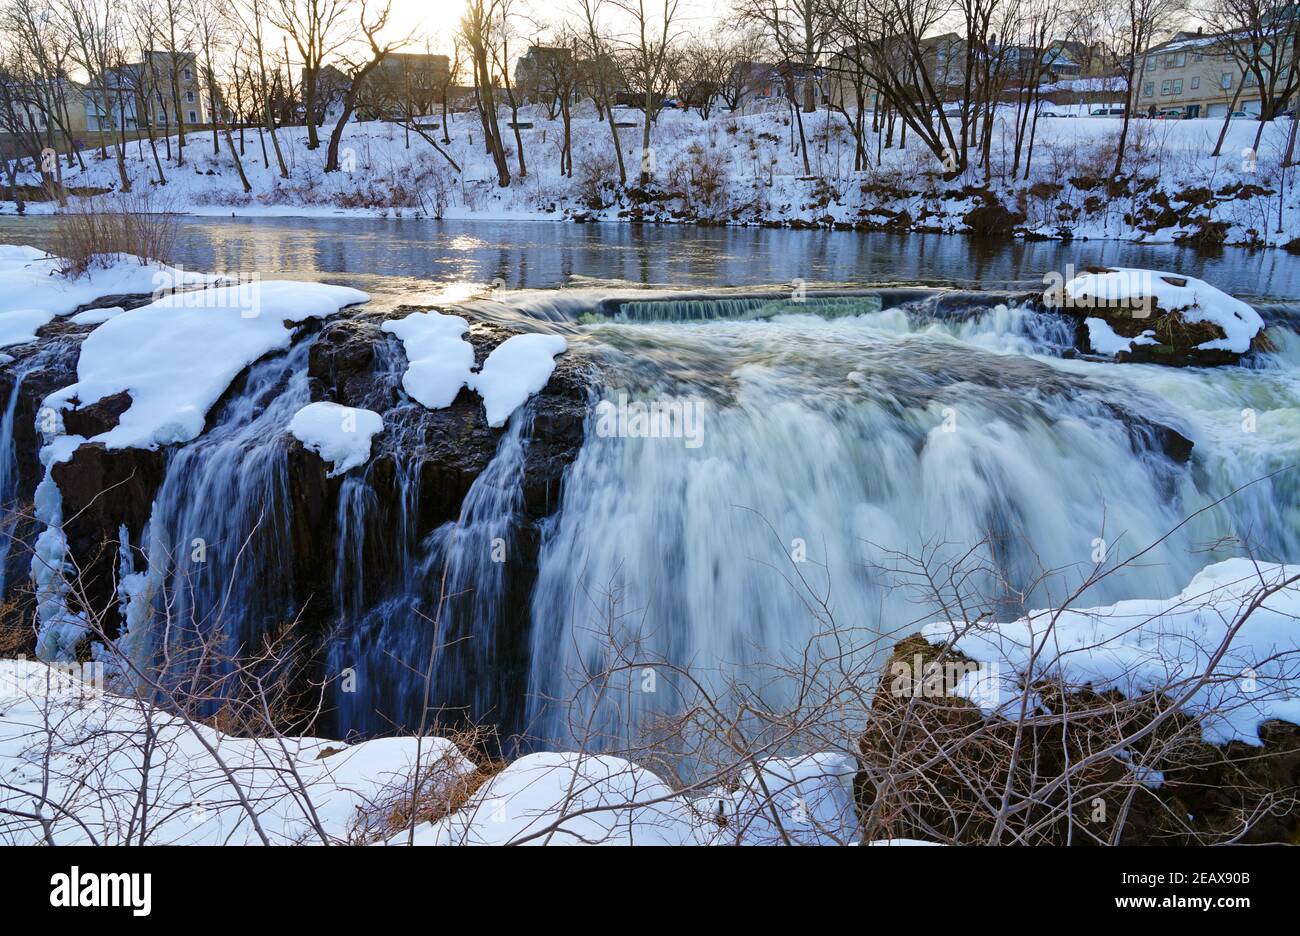 Paterson Nj 6 Feb 2021 Winter View Of The Great Falls Of The Passaic River Part Of The Paterson Great Falls National Historical Park In New Jersey 2EAX90B 